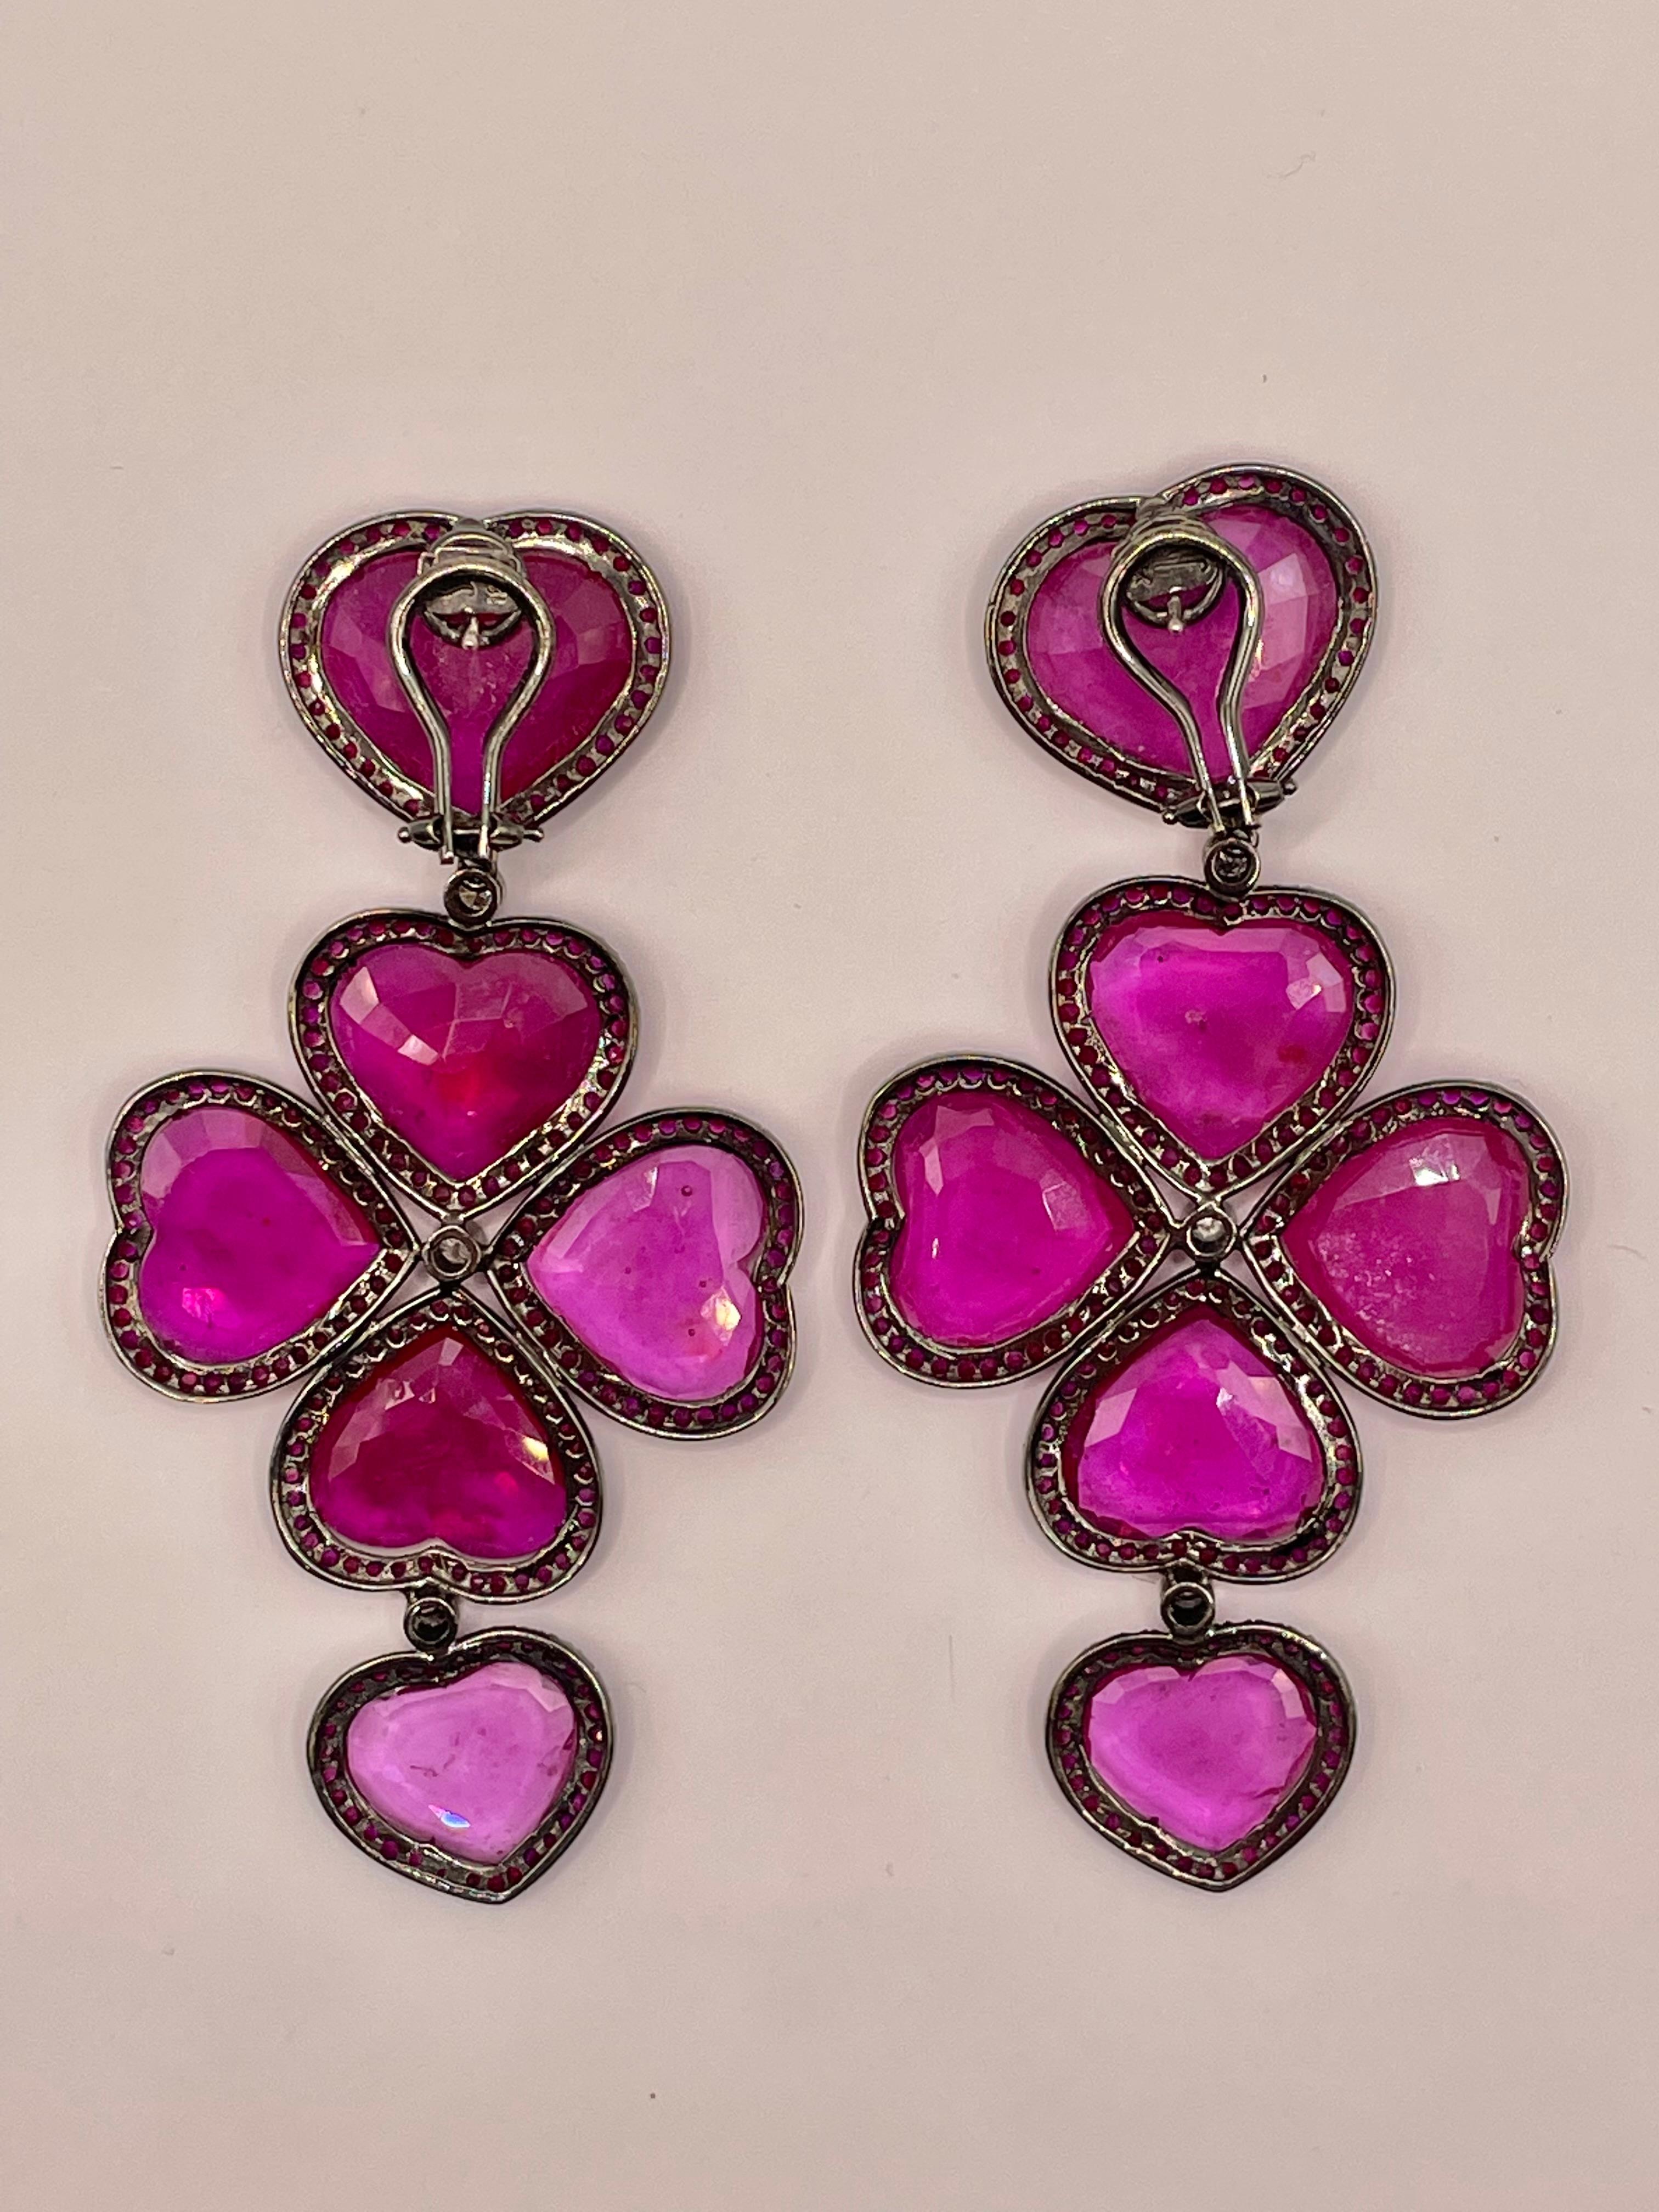 One of a kind ruby chandelier earrings ,made in 18 k white gold covered with black rhodium .4.85ct of rubies ,0.40ct  white diamonds, about 20 ct of  ruby slices in unique heart shape.
Sophisticated  Red Carpet piece  of jewelry !